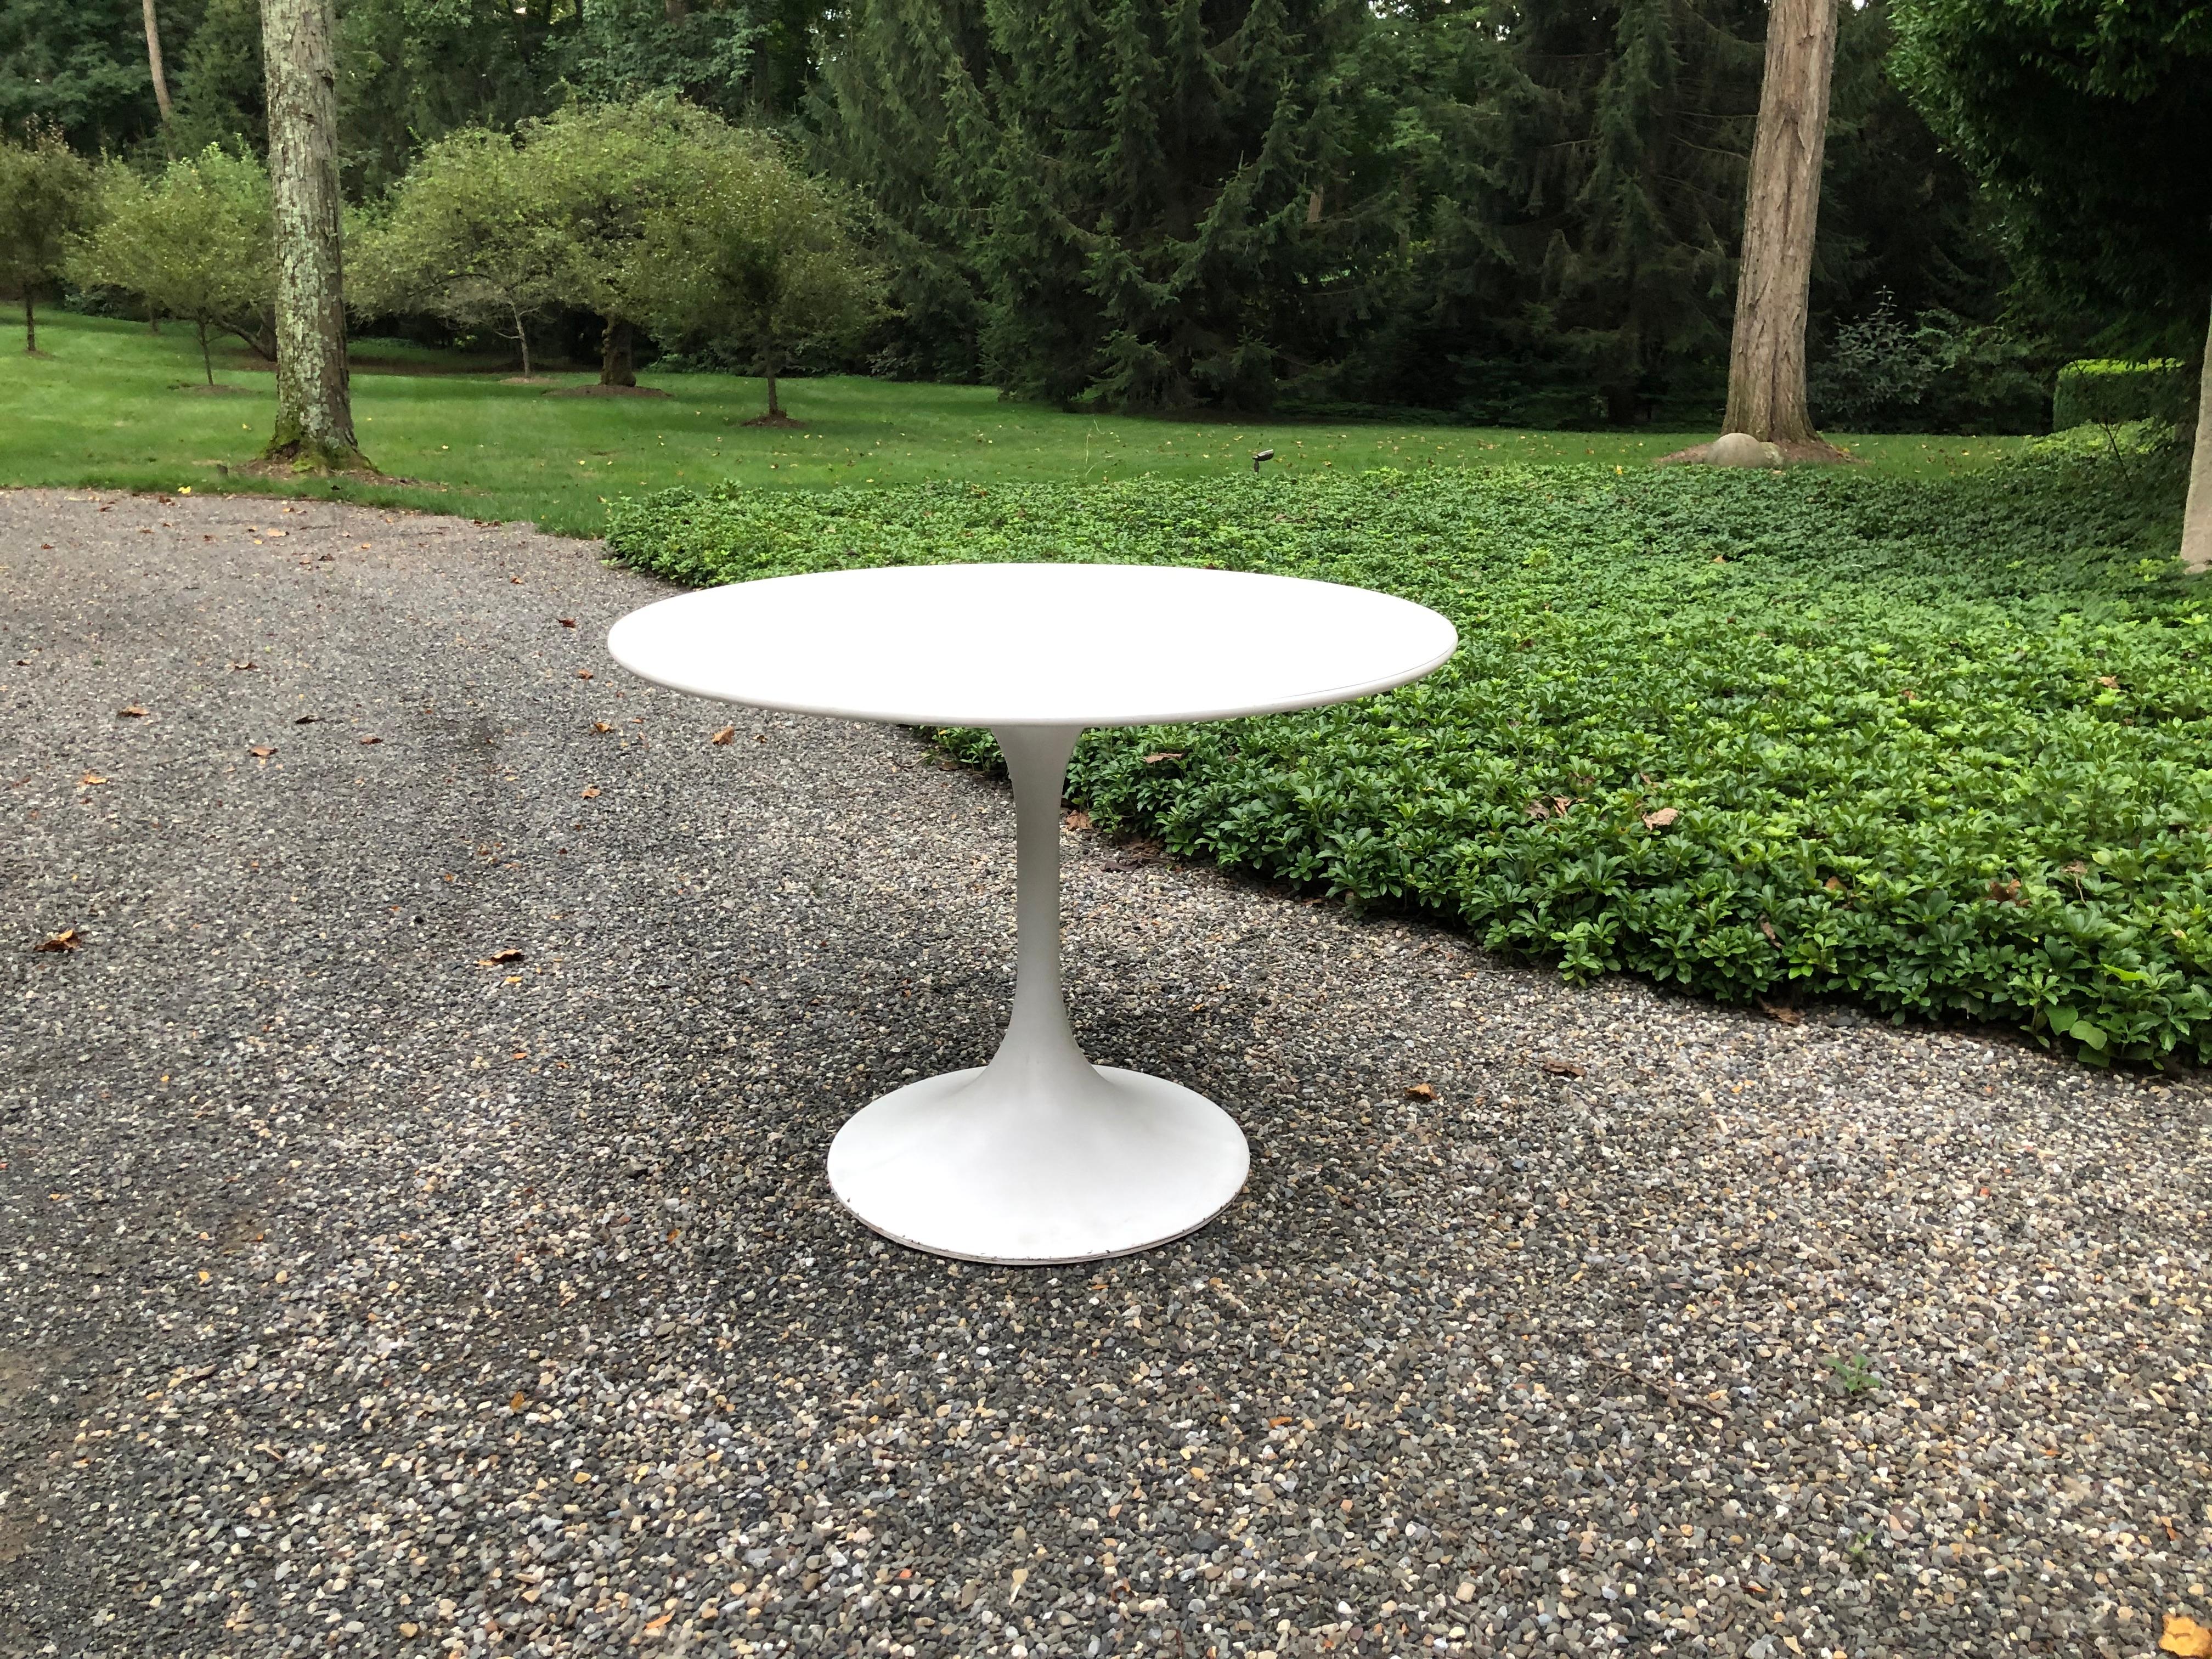 Vintage “Tulip” dining table  having an aluminum base and laminate top. Wear consistent with age and use. 